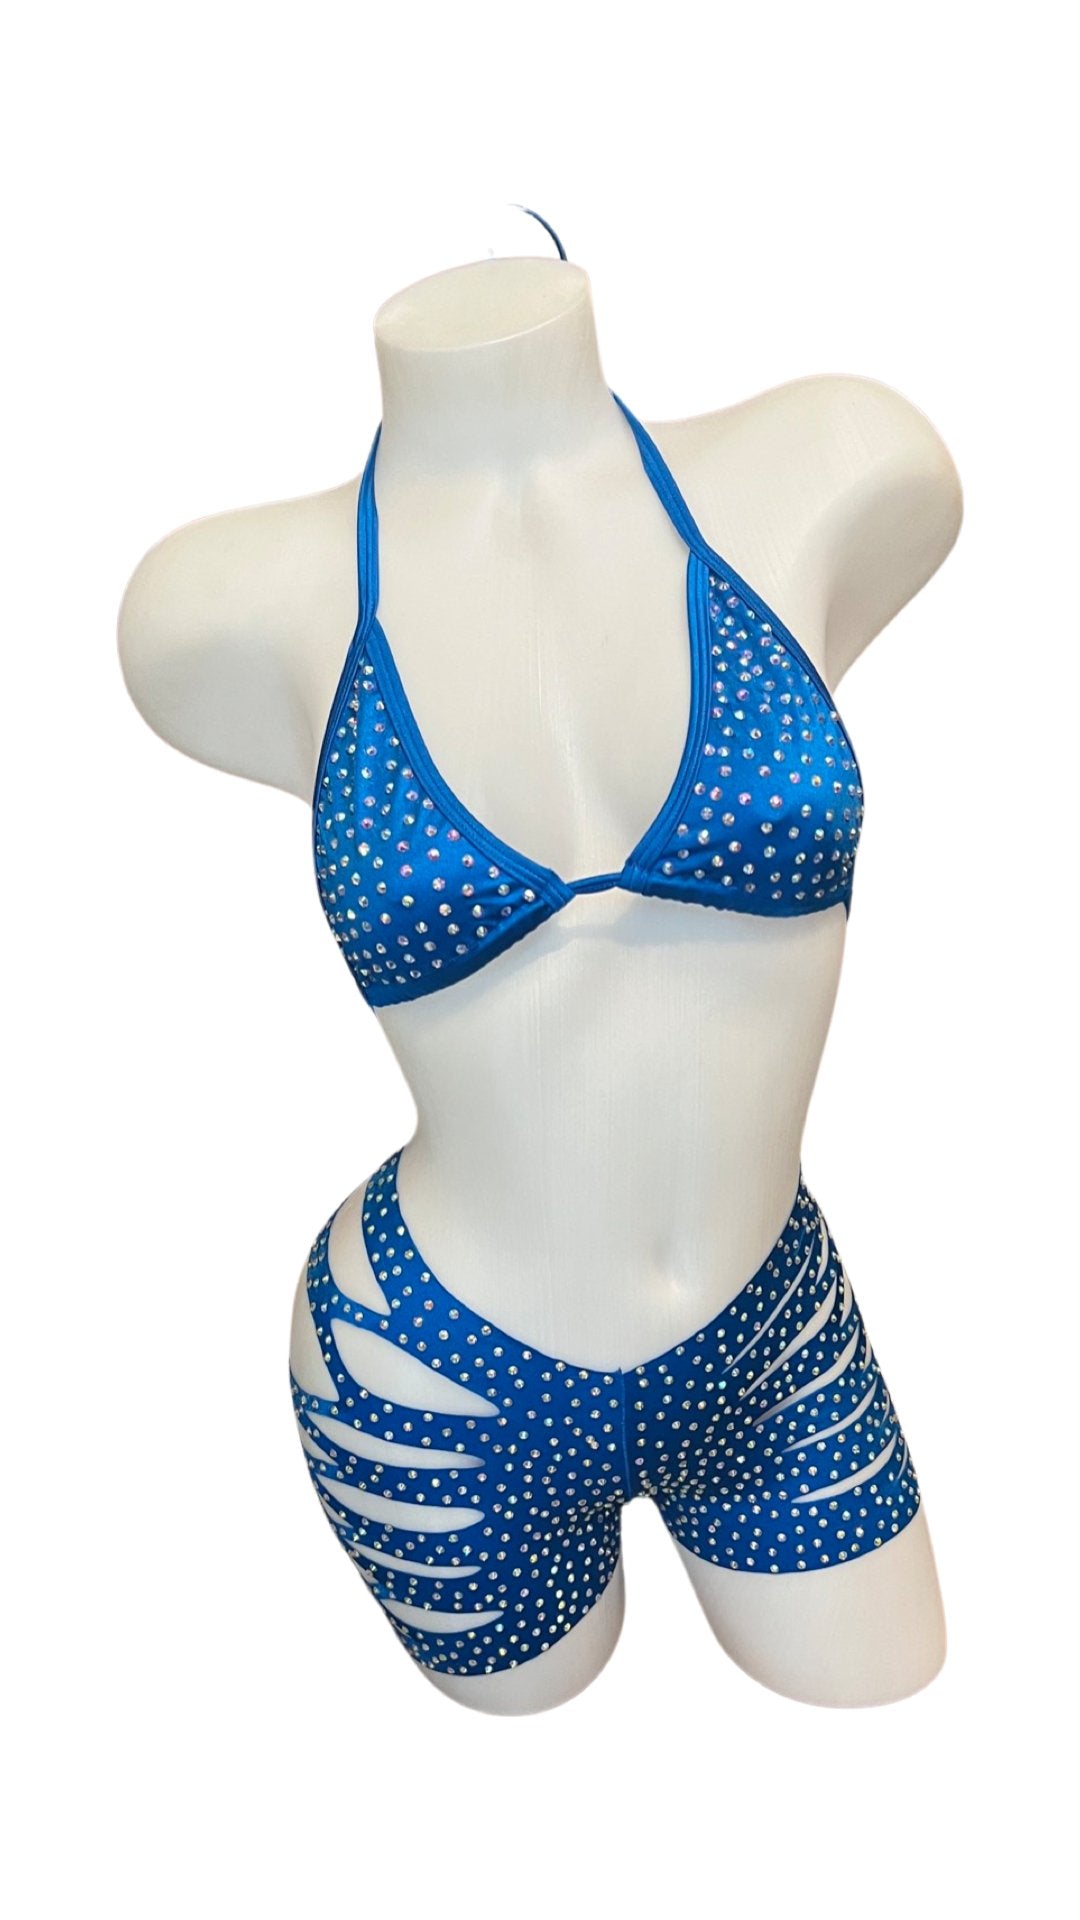 Rhinestone Triangle Top and Cut Out Short Set Royal Blue - Model Express VancouverBikini